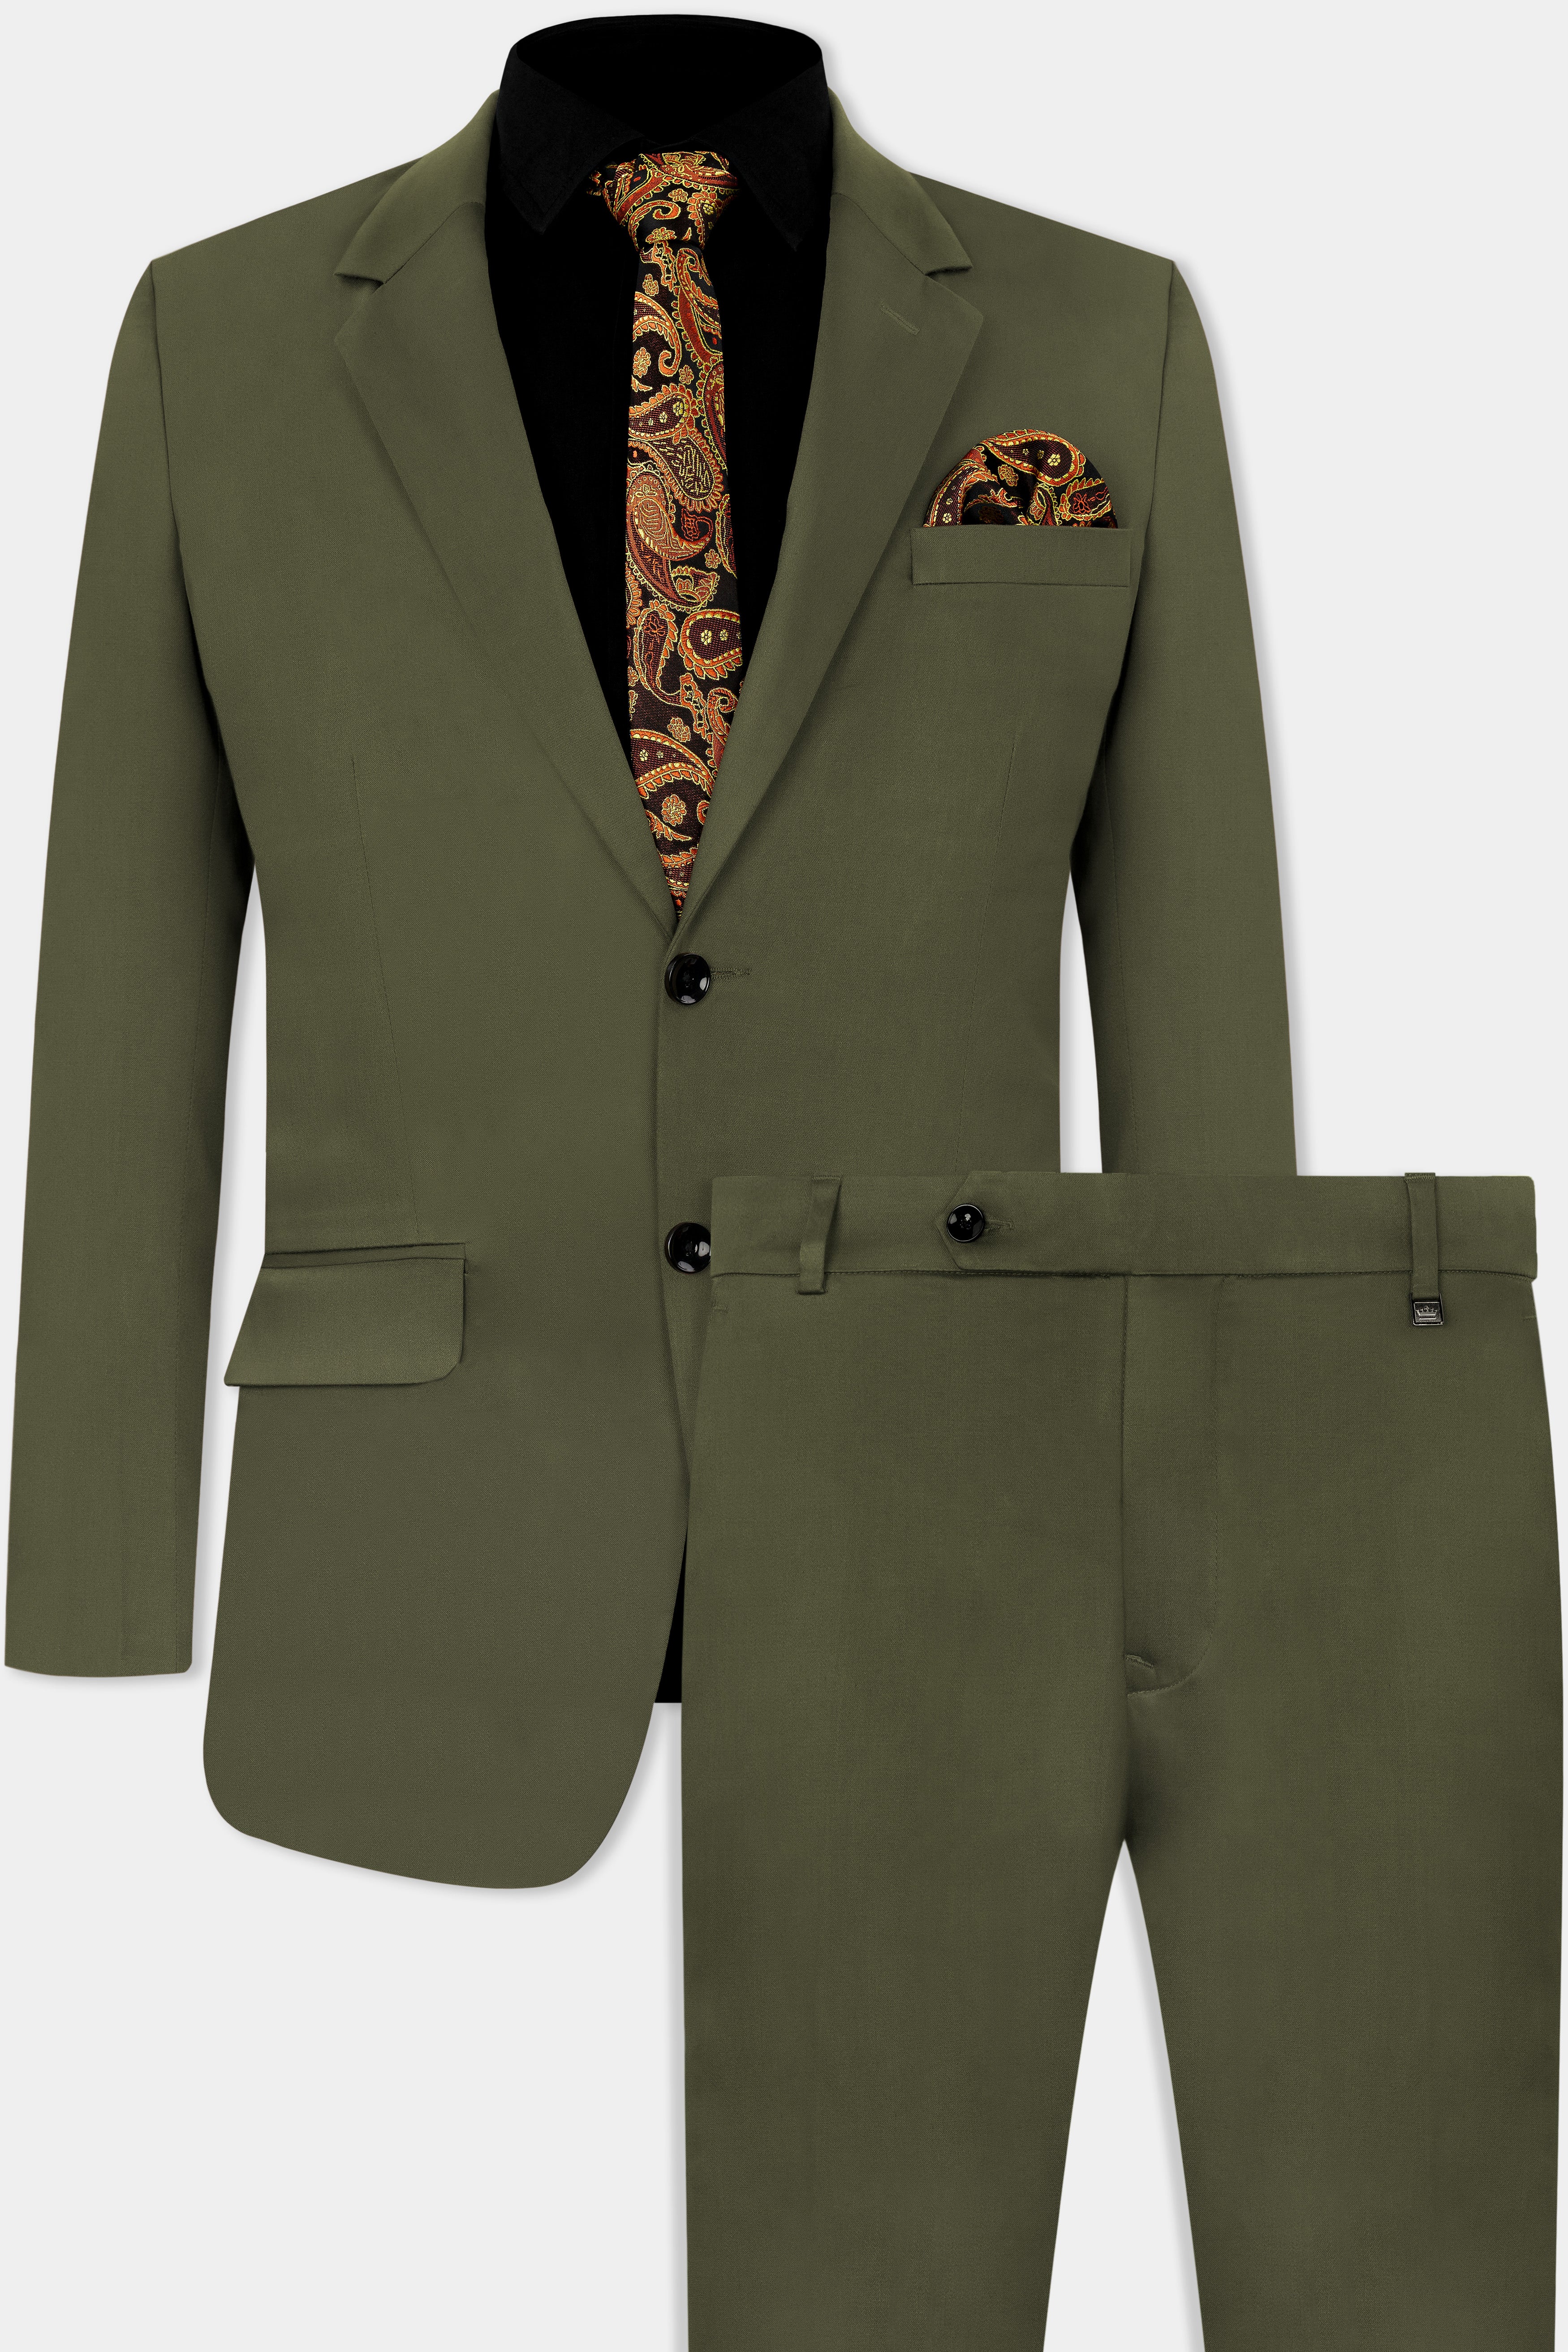 Find The Trendy Sage Green 3 Piece Suit For Men– SAINLY